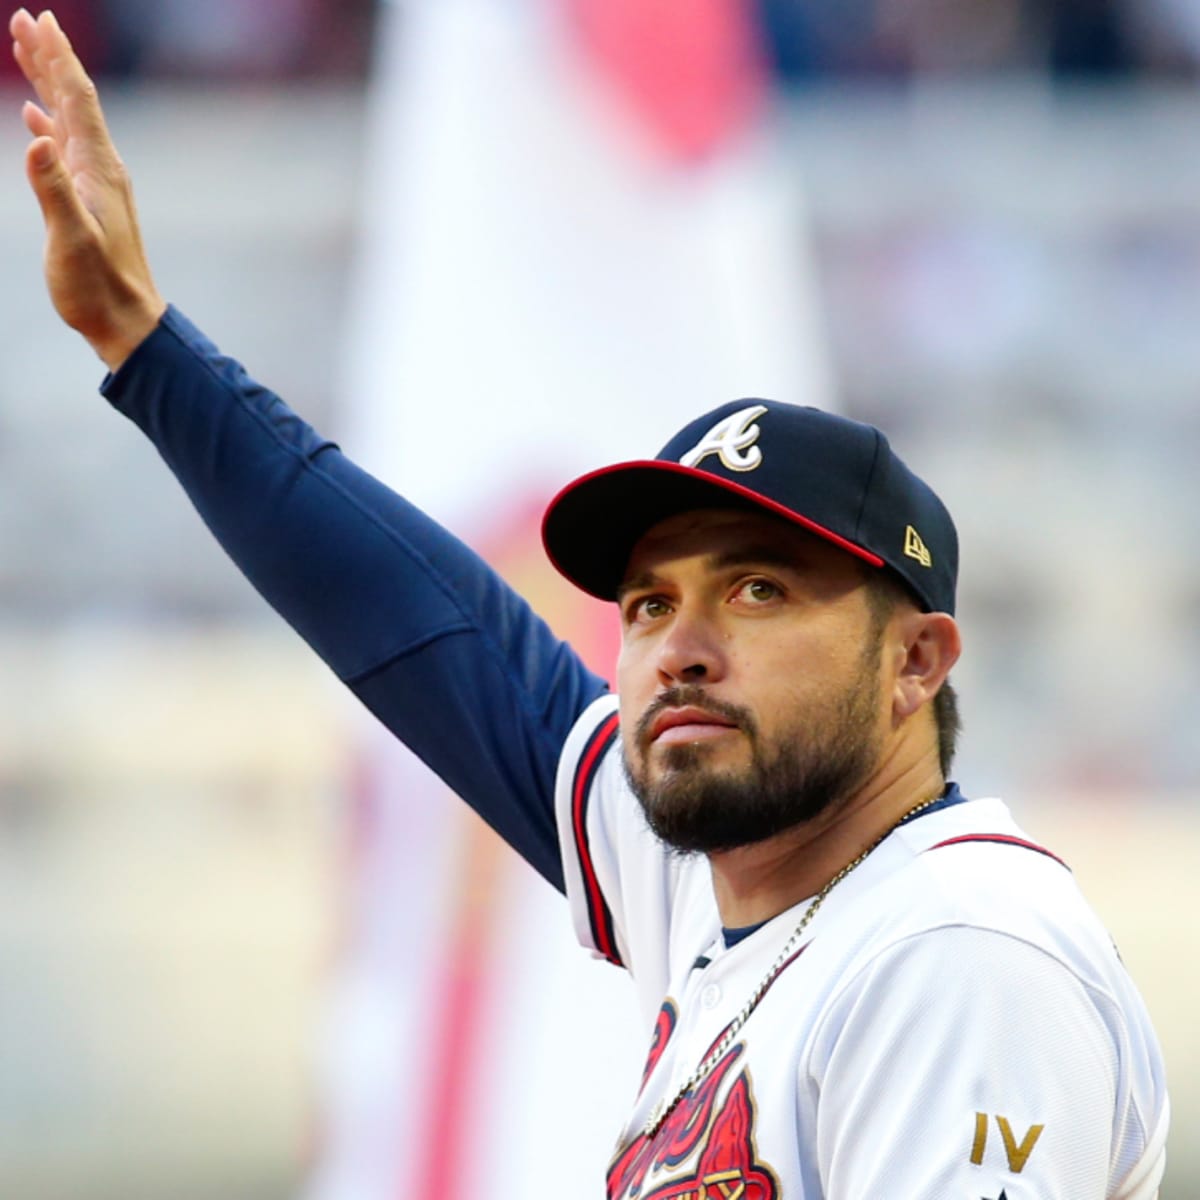 Braves news: Travis d'Arnaud hitting IL after dirty play by